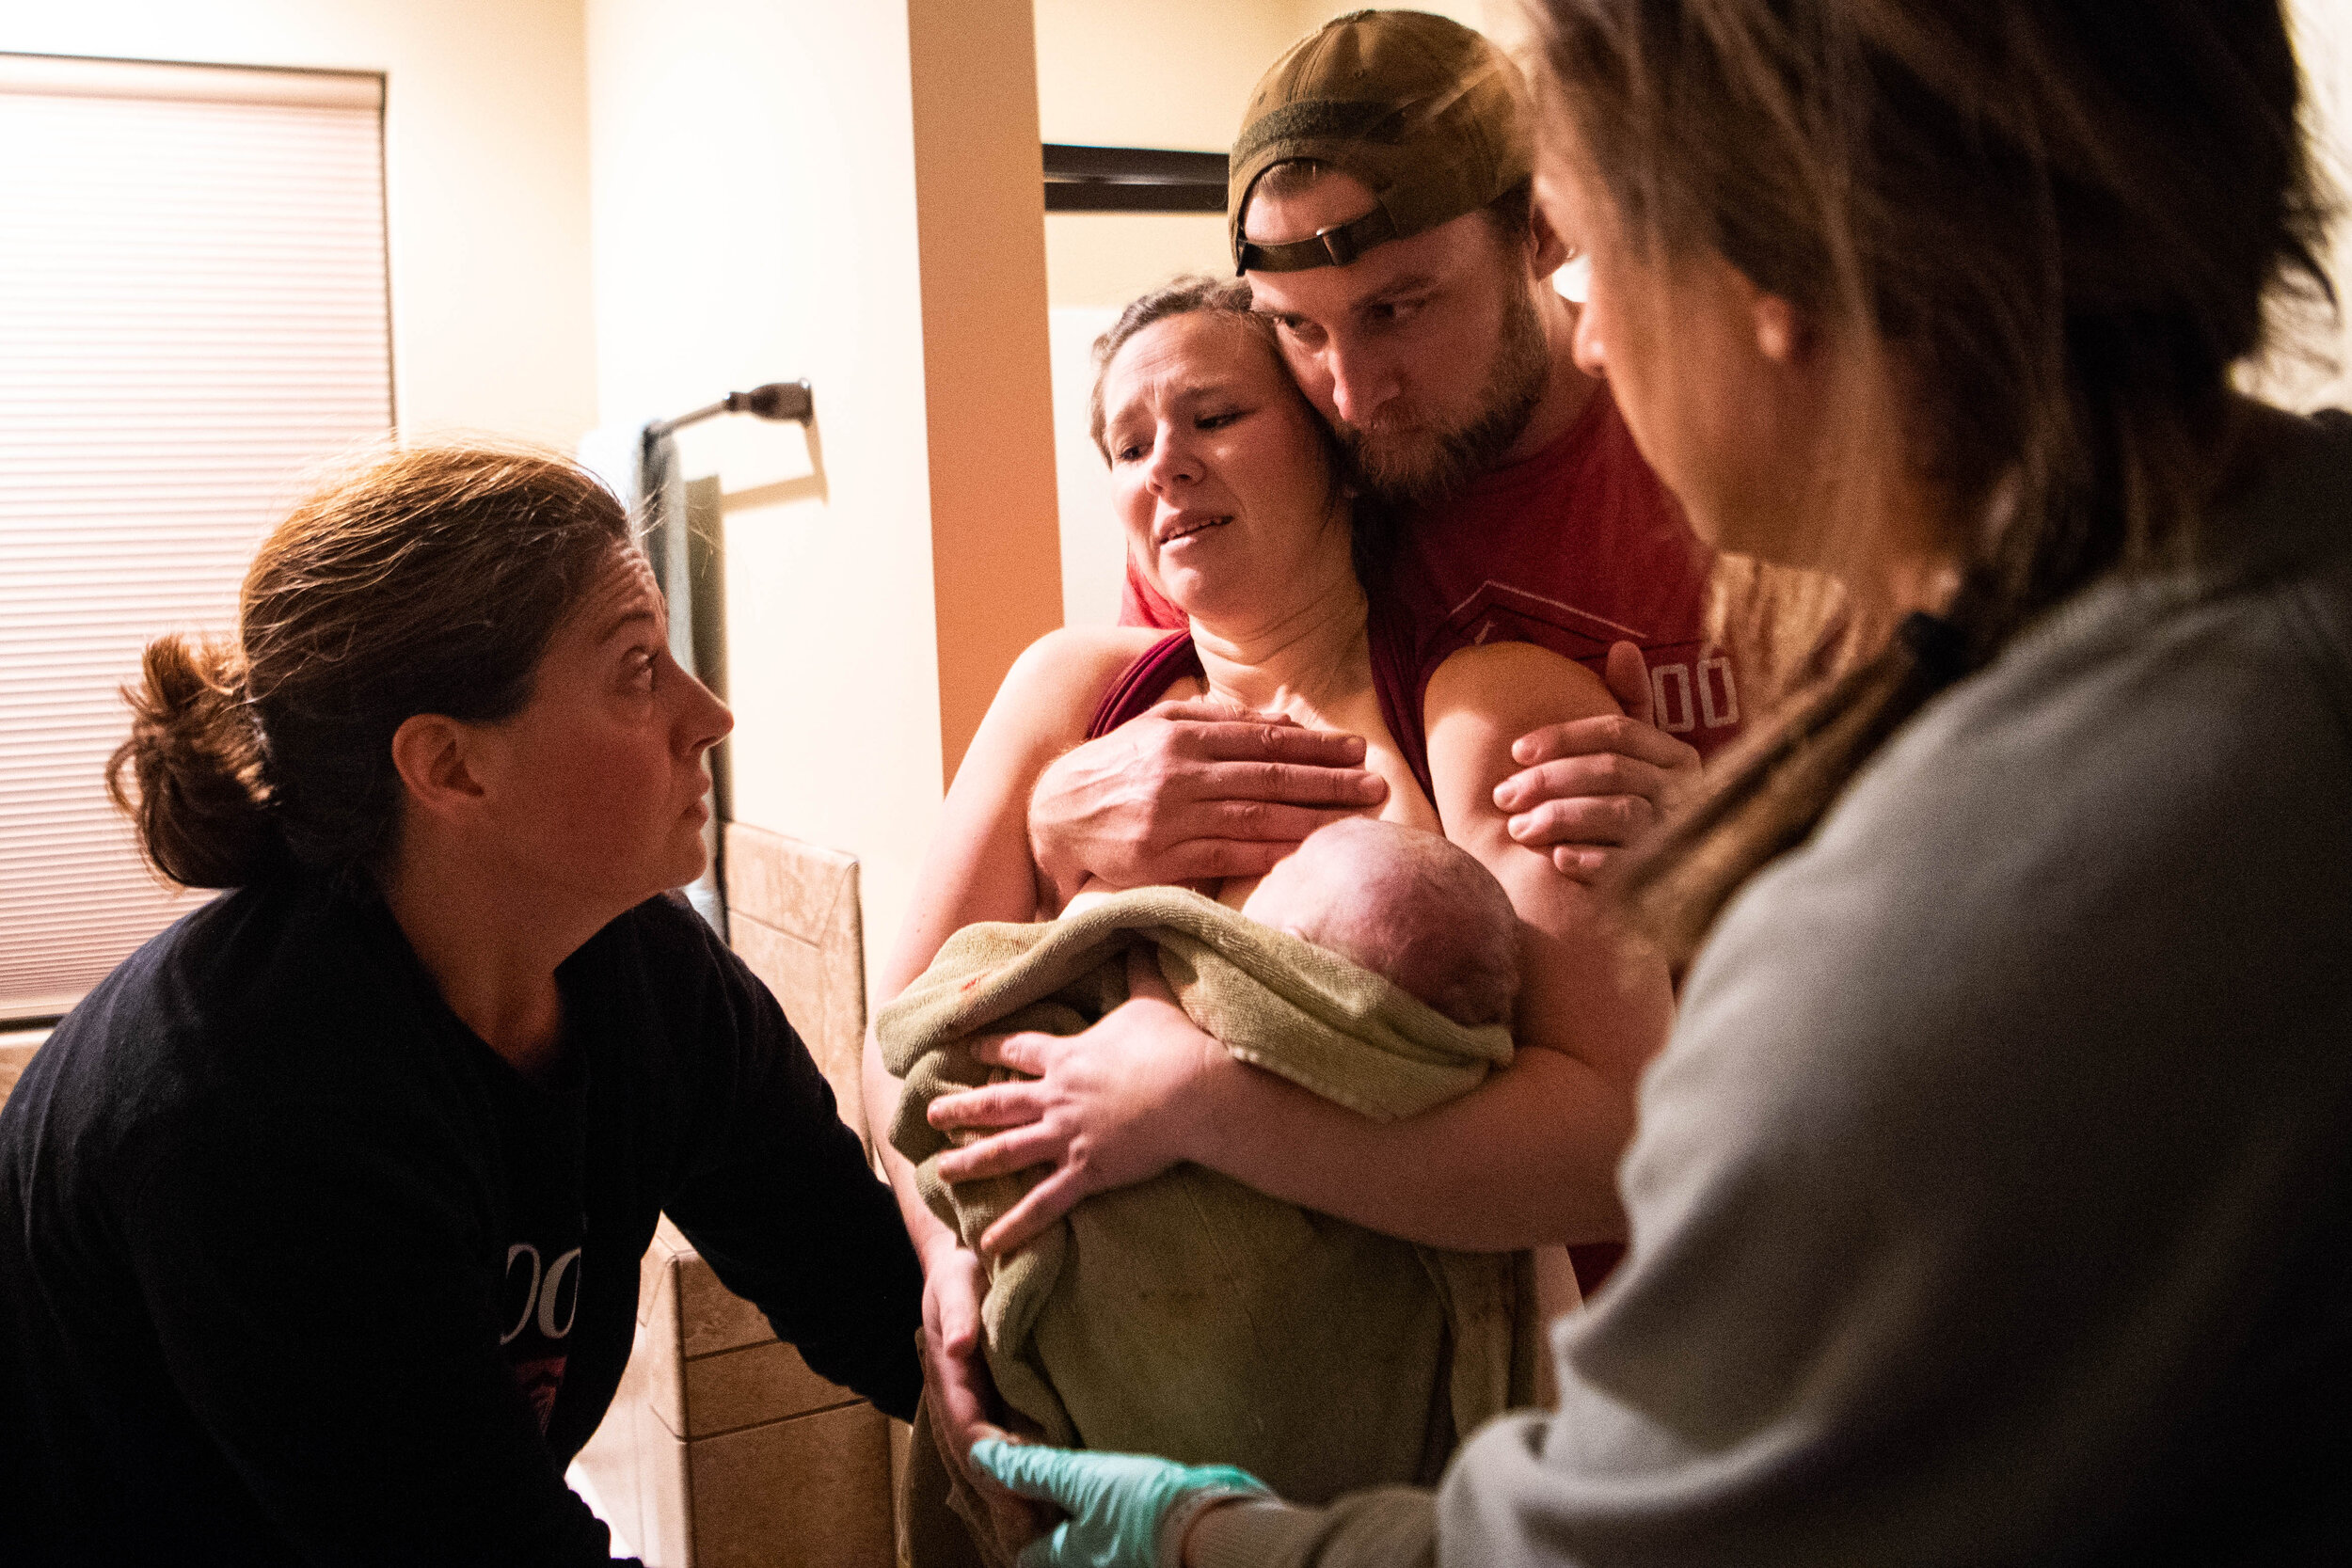  Midwife Gaylea McDougal of Roots Childbirth discusses cutting the cord as Eric Wehmeyer holds his wife, Beth, and she holds their son Henry Hudson after giving birth at their home. 